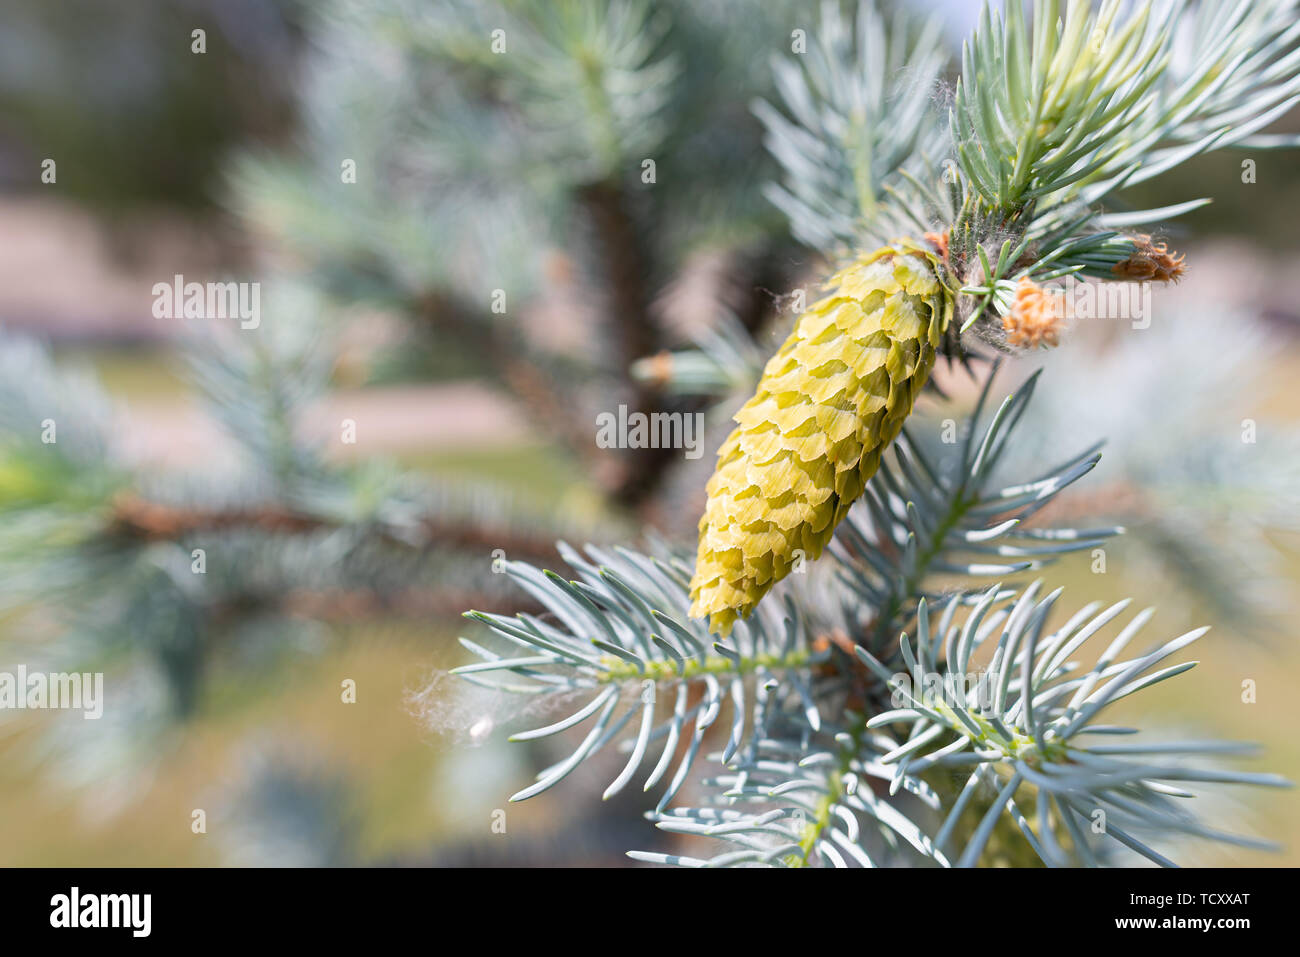 Picea Pungens 'Glauca',  Blue Spruce, young cone, under the soft spring sun Stock Photo